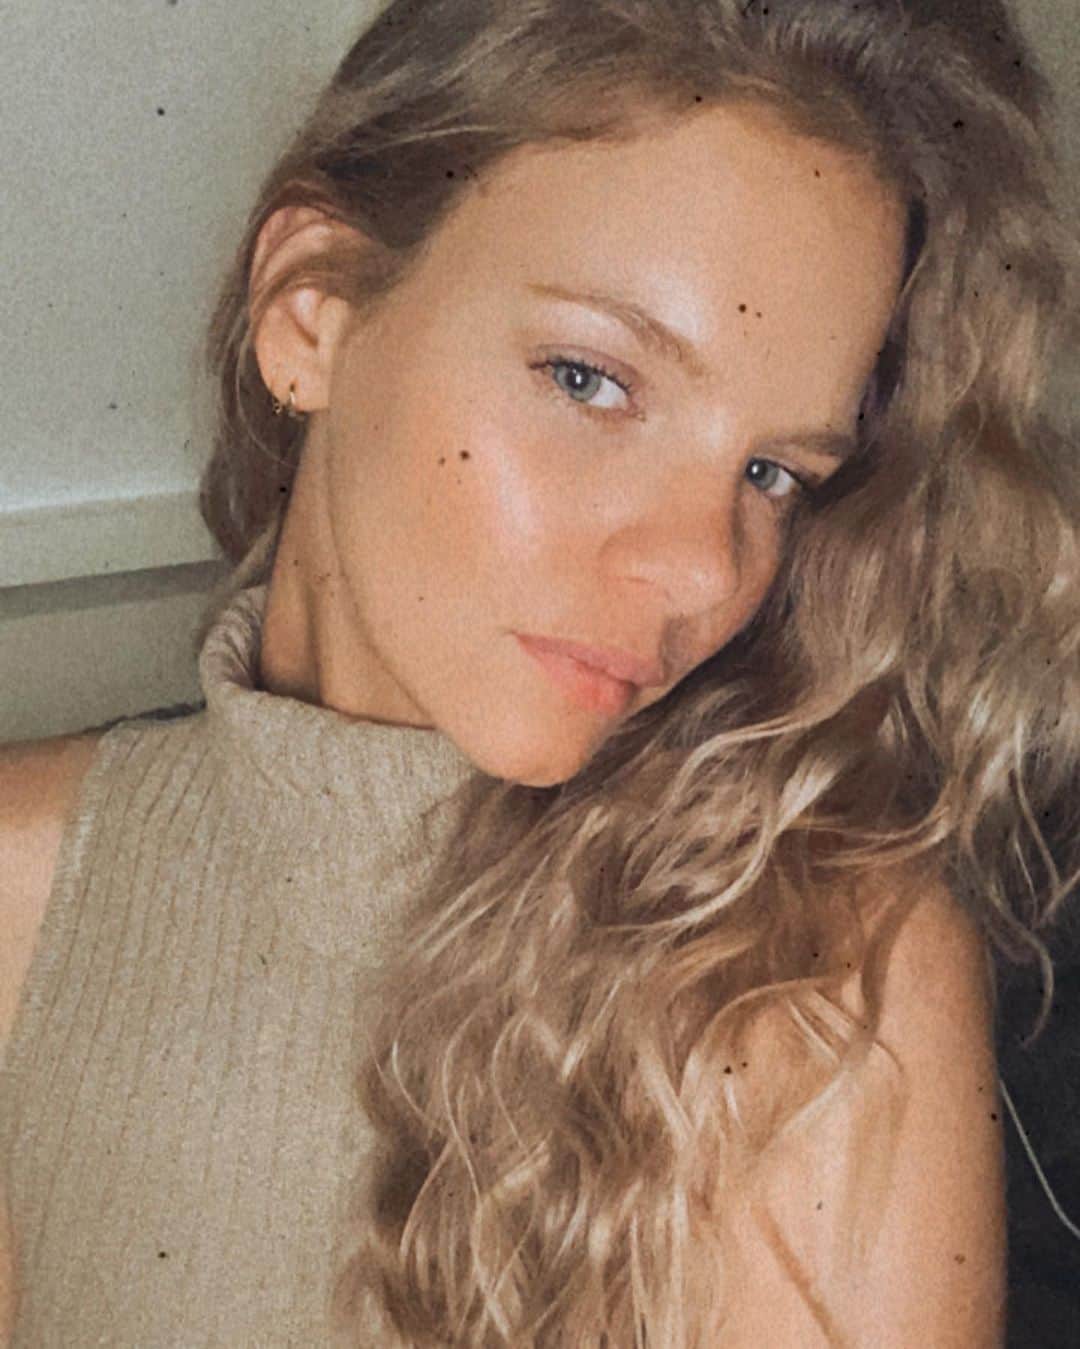 Marloes Horstのインスタグラム：「I guess curls are my vibe this summer👩🏼‍🦱🌻」